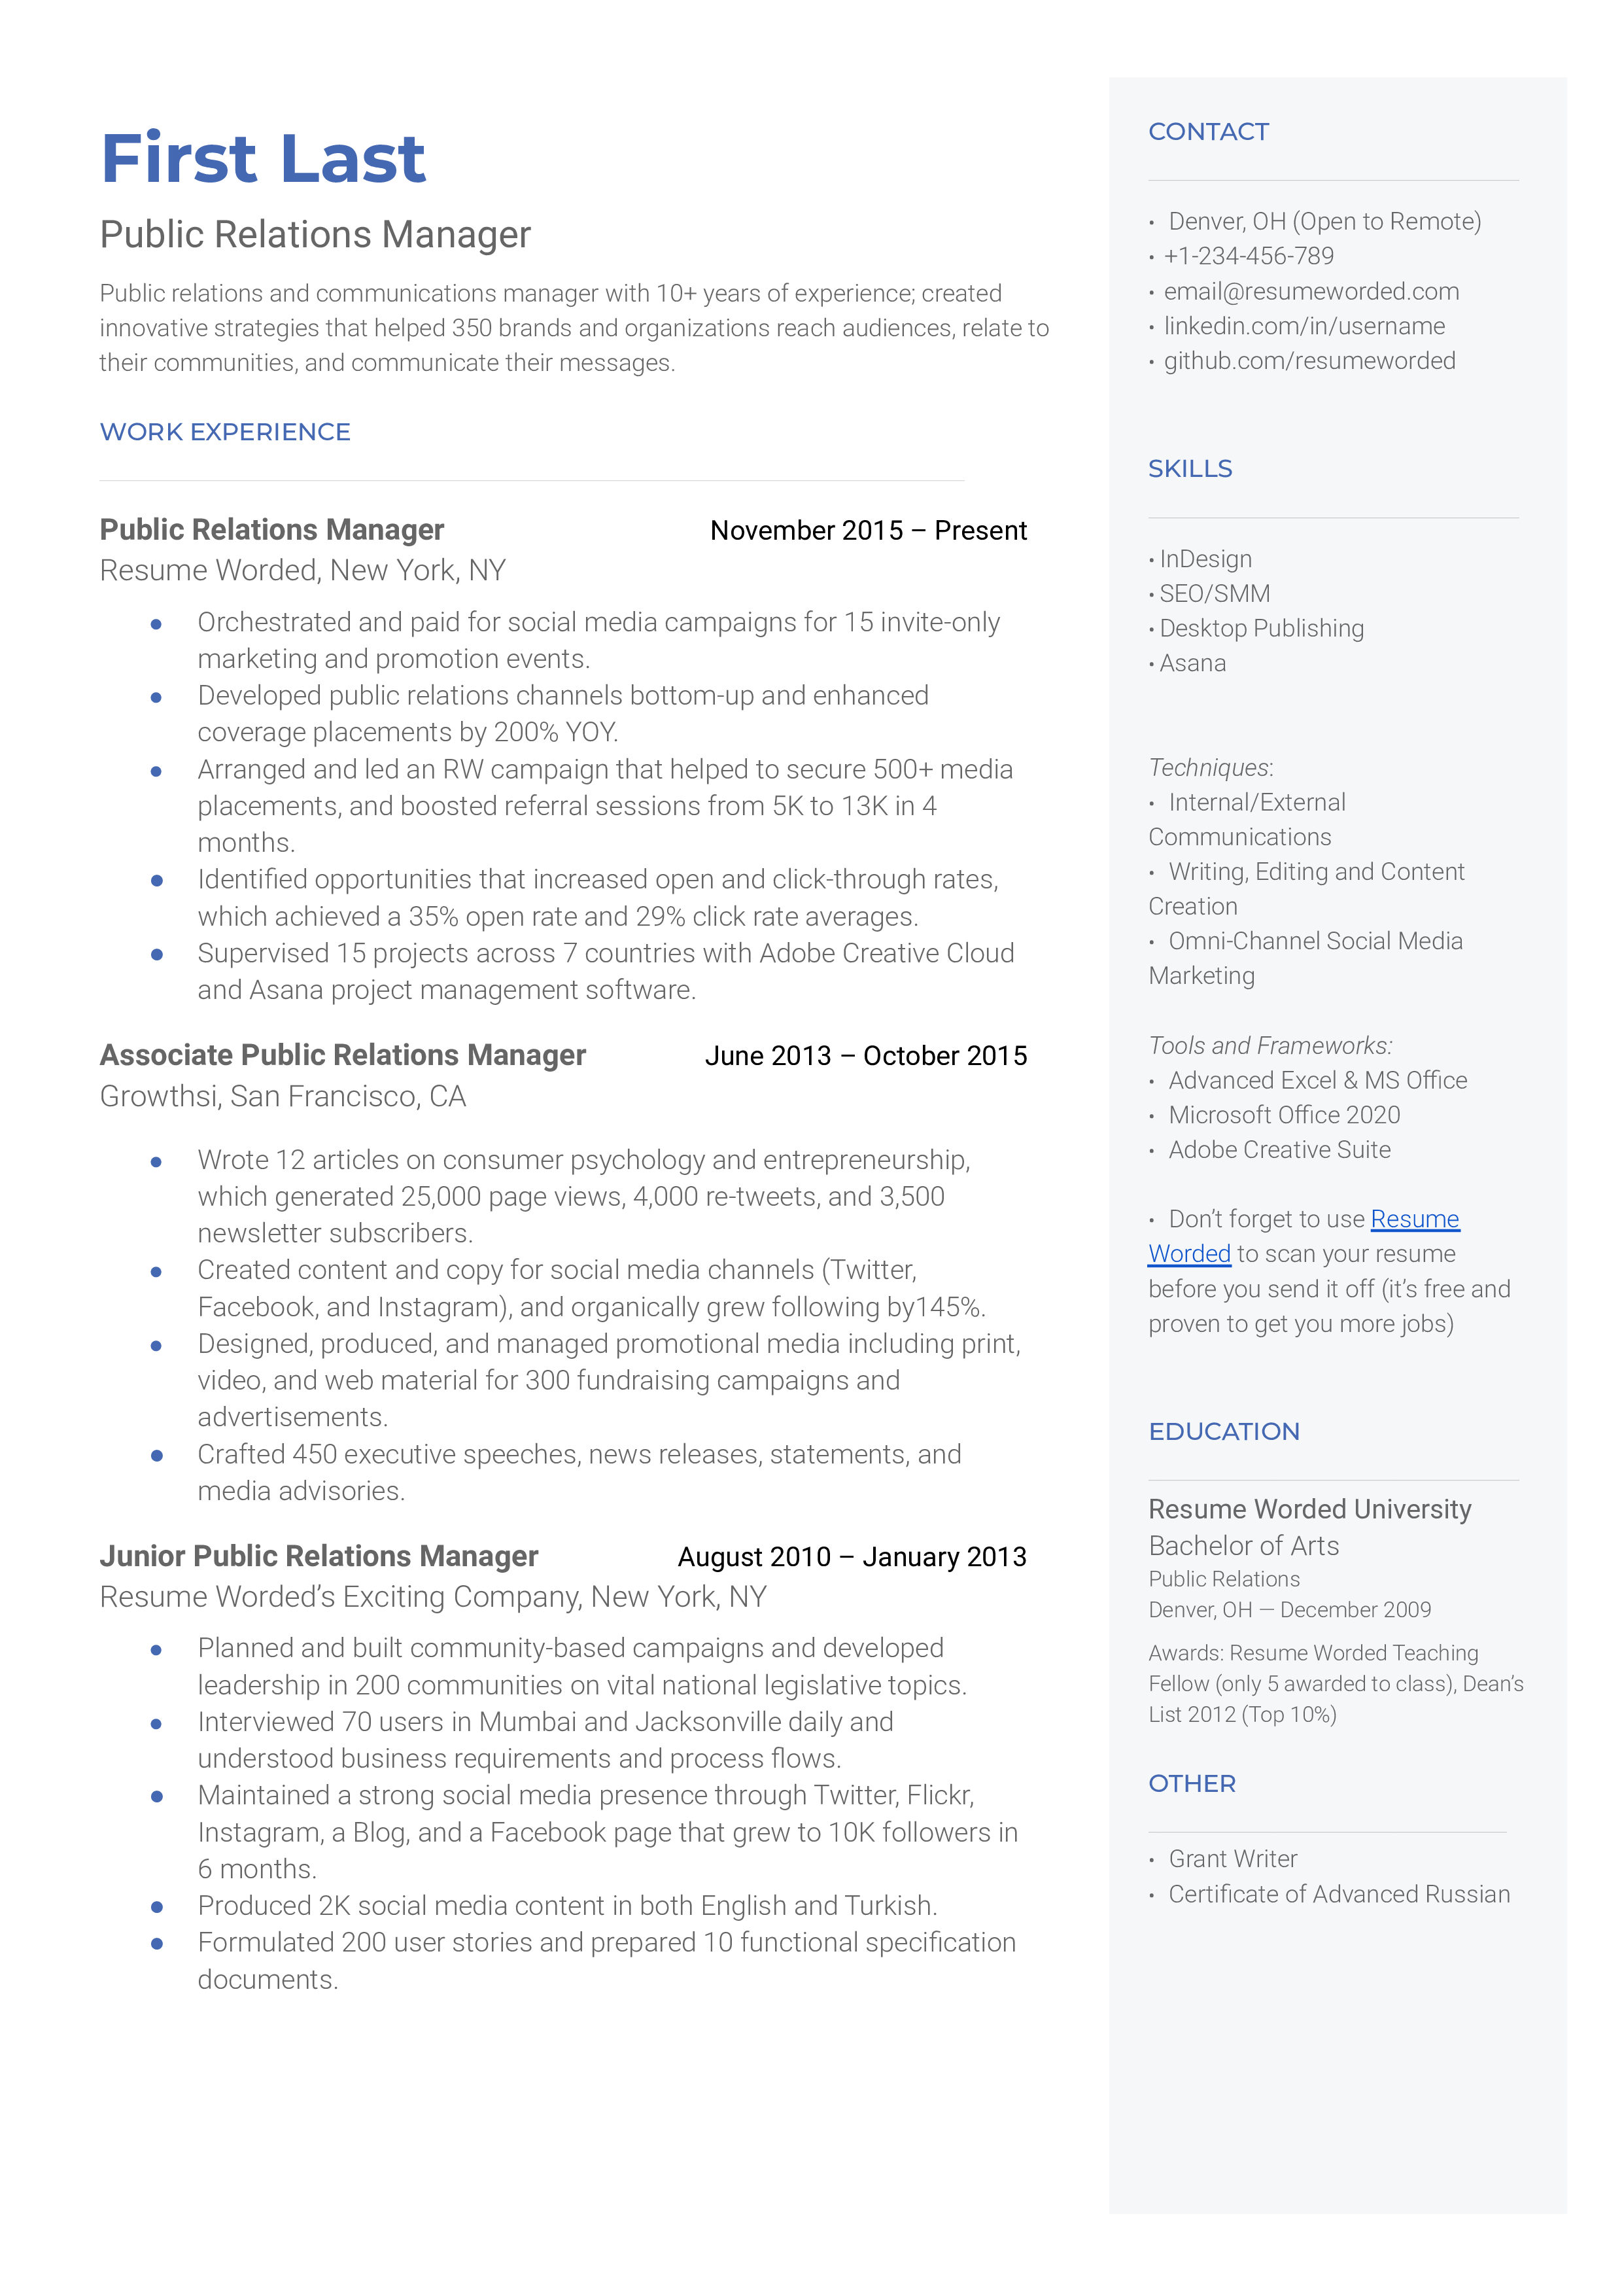 A communications coordinator resume sample that highlights the applicant’s career progression and awards.